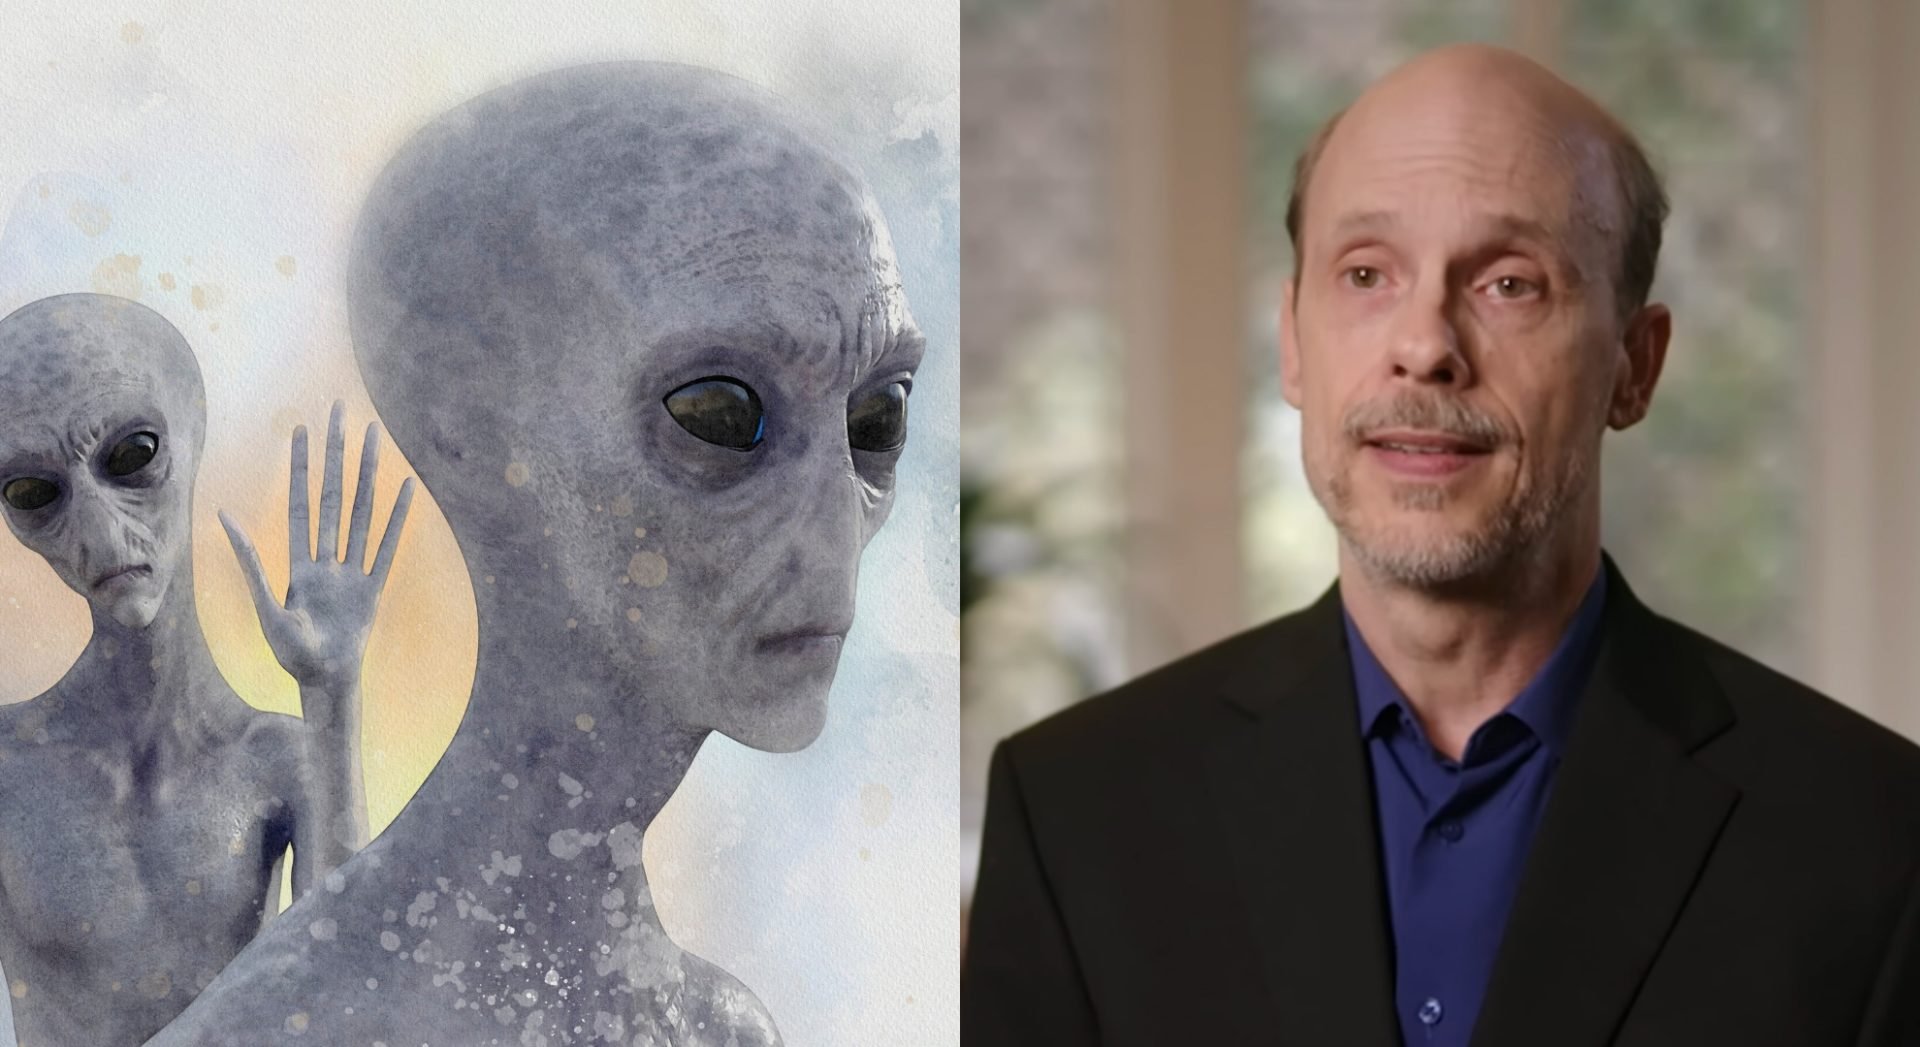 STORY OF ALIEN ‘J ROD’ WHO SURVIVED UFO CRASH AND ‘WORKED AT AREA 51’ IS INSANE